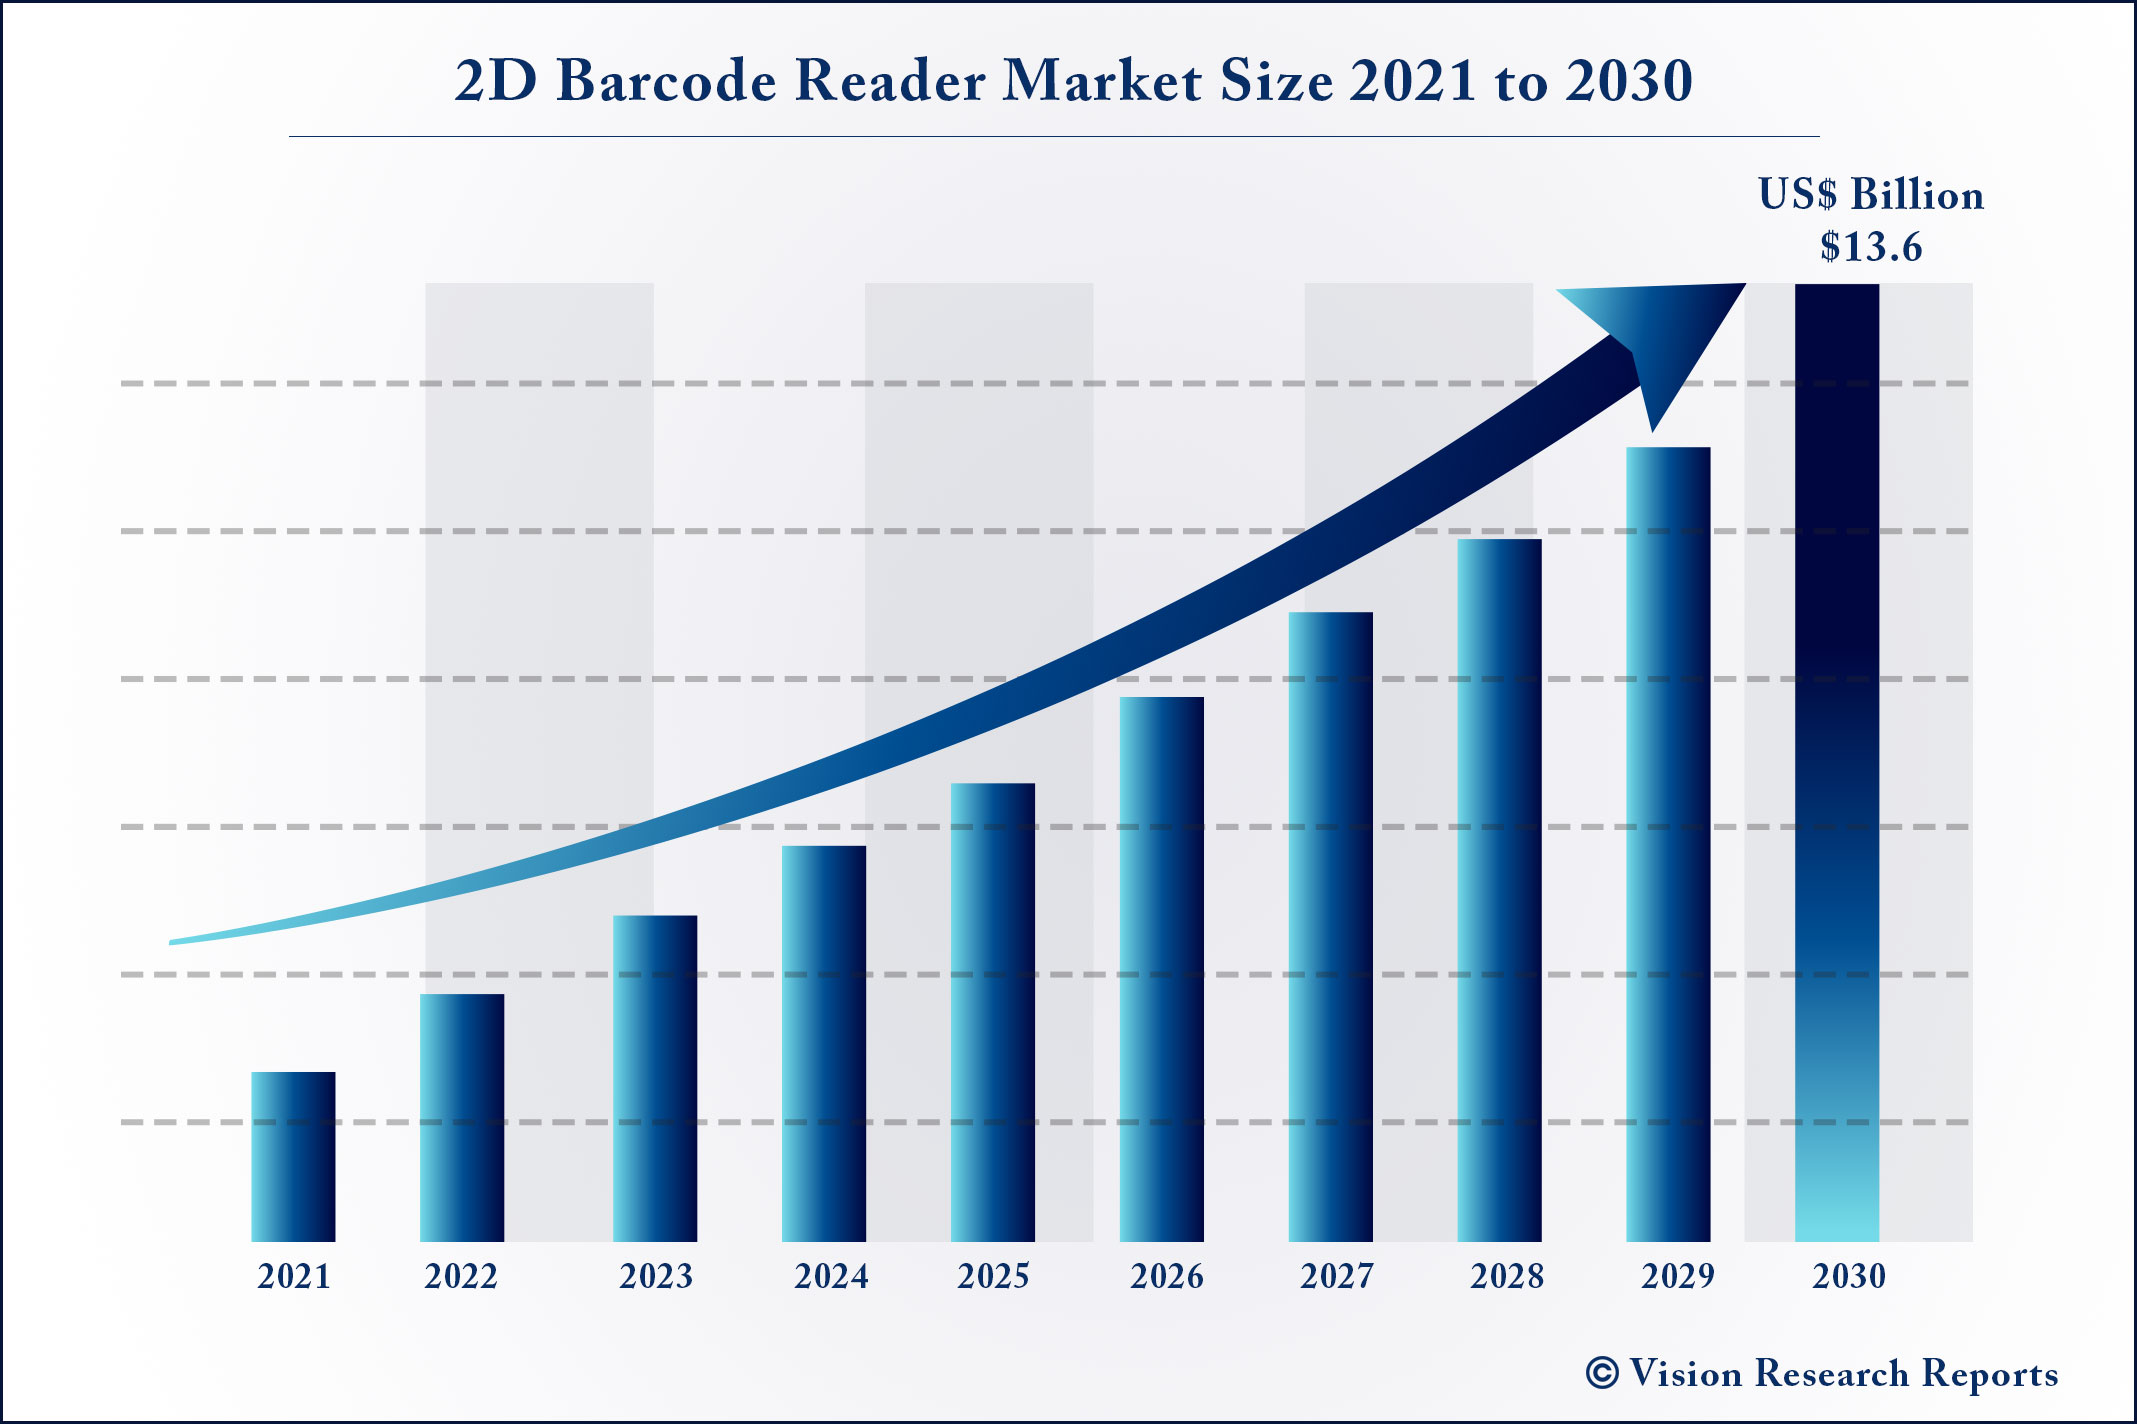 2D Barcode Reader Market Size 2021 to 2030